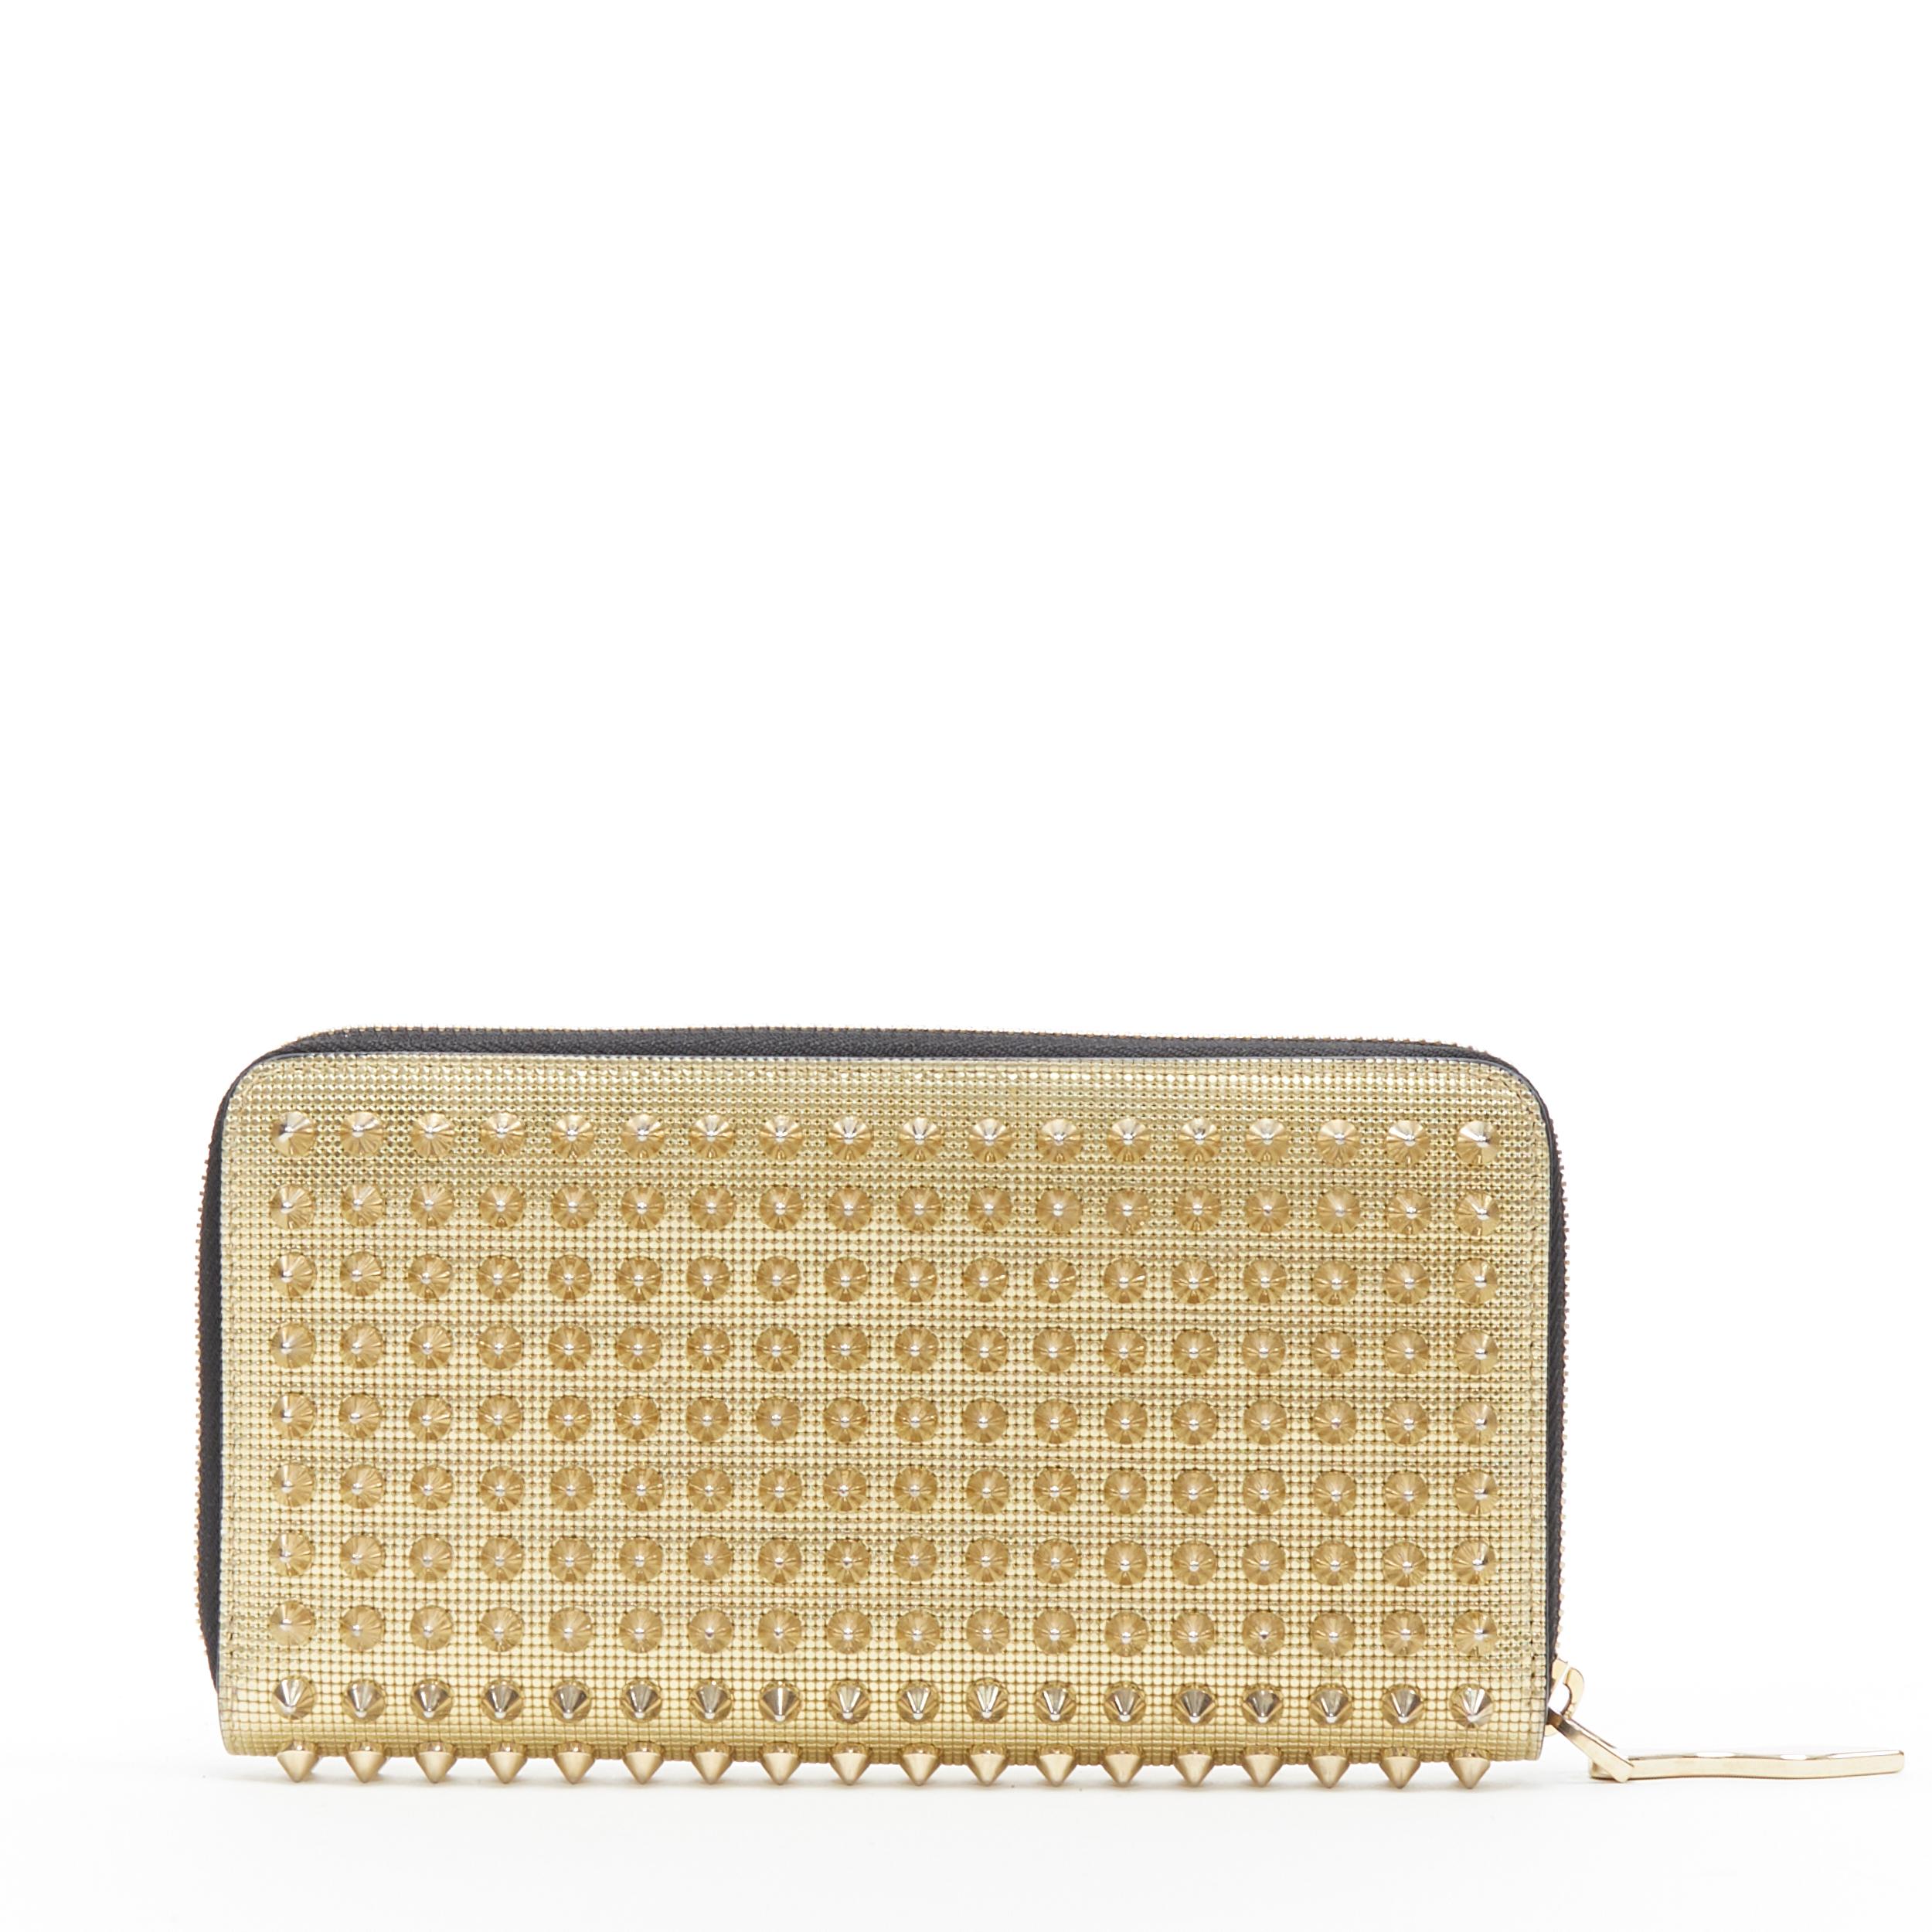 CHRISTIAN LOUBOUTIN Panettone metallic gold spike stud continental long wallet
Brand: Christian Louboutin
Designer: Christian Louboutin
Model Name / Style: Panettone
Material: Leather
Color: Gold
Pattern: Solid
Closure: Zip
Extra Detail: Panettone